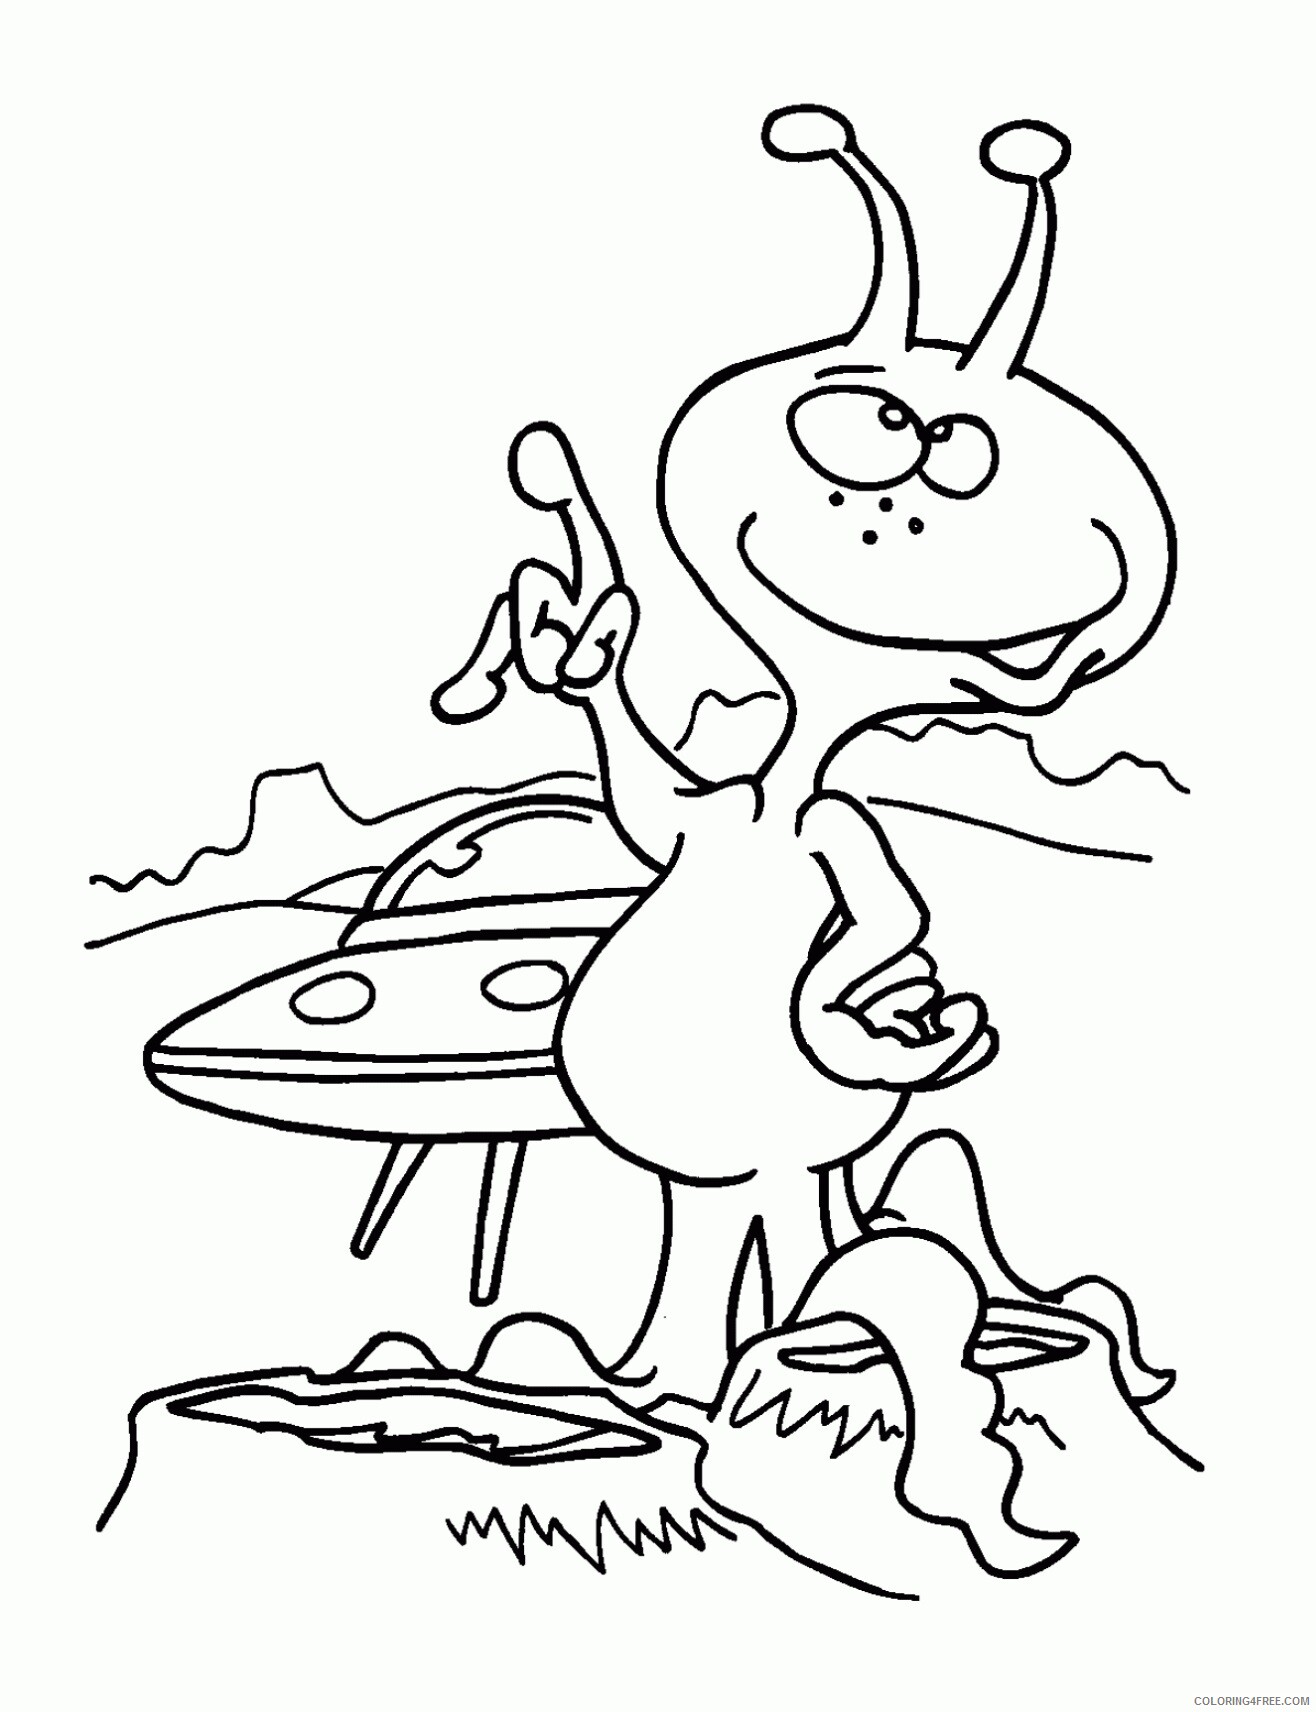 Alien Coloring Pages Alien 2 Printable 2021 0121 Coloring4free